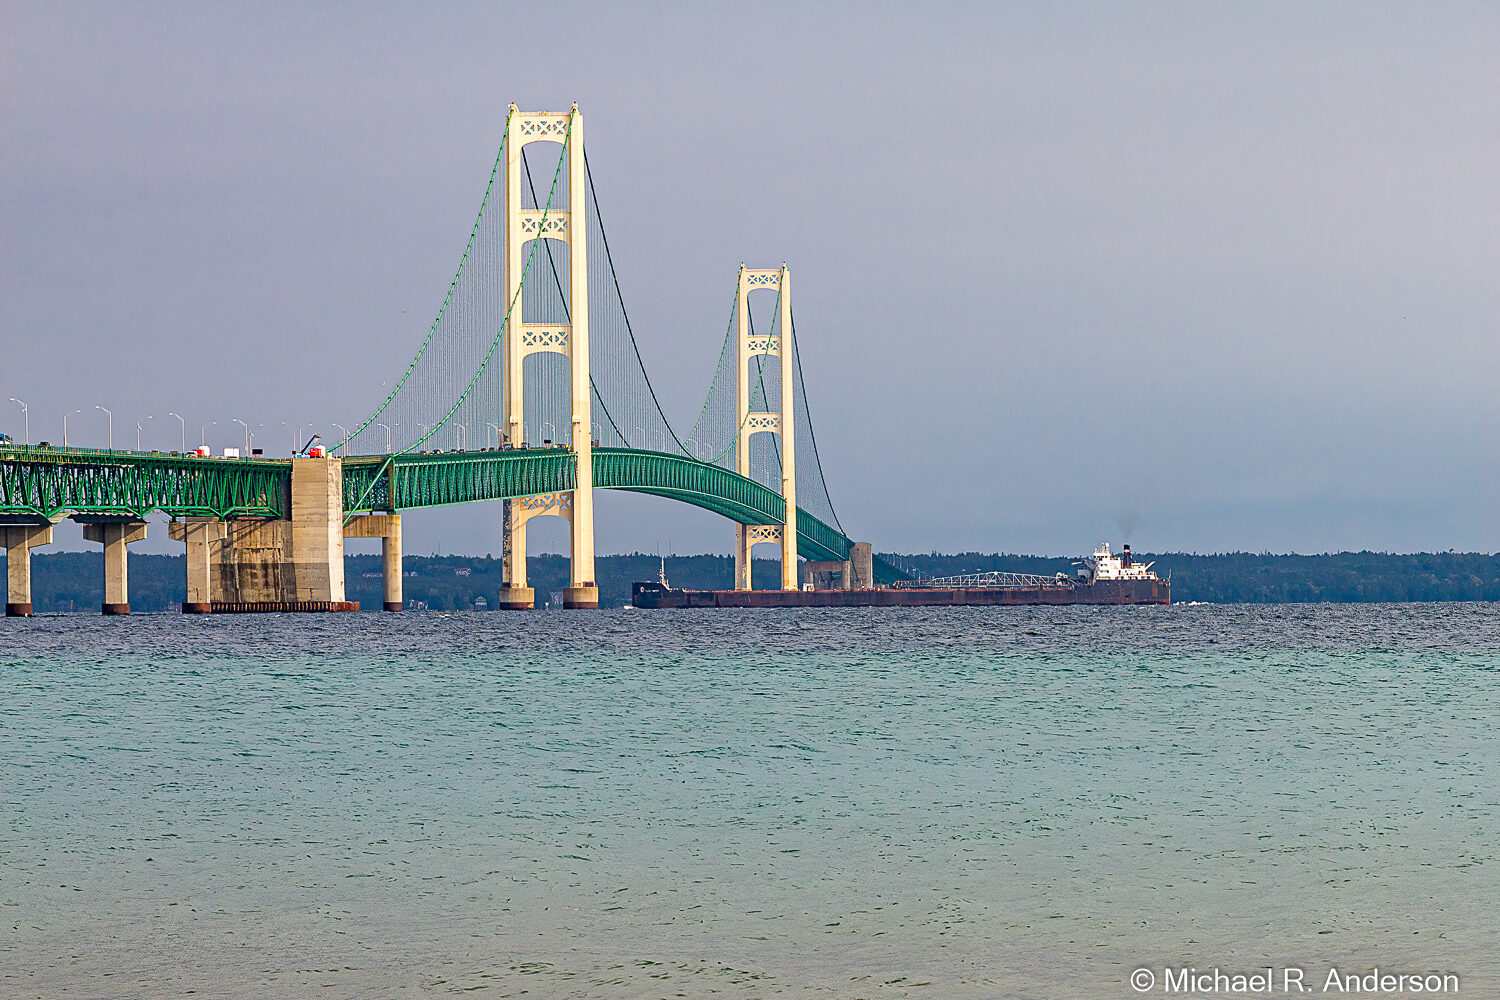 The Mighty Mac